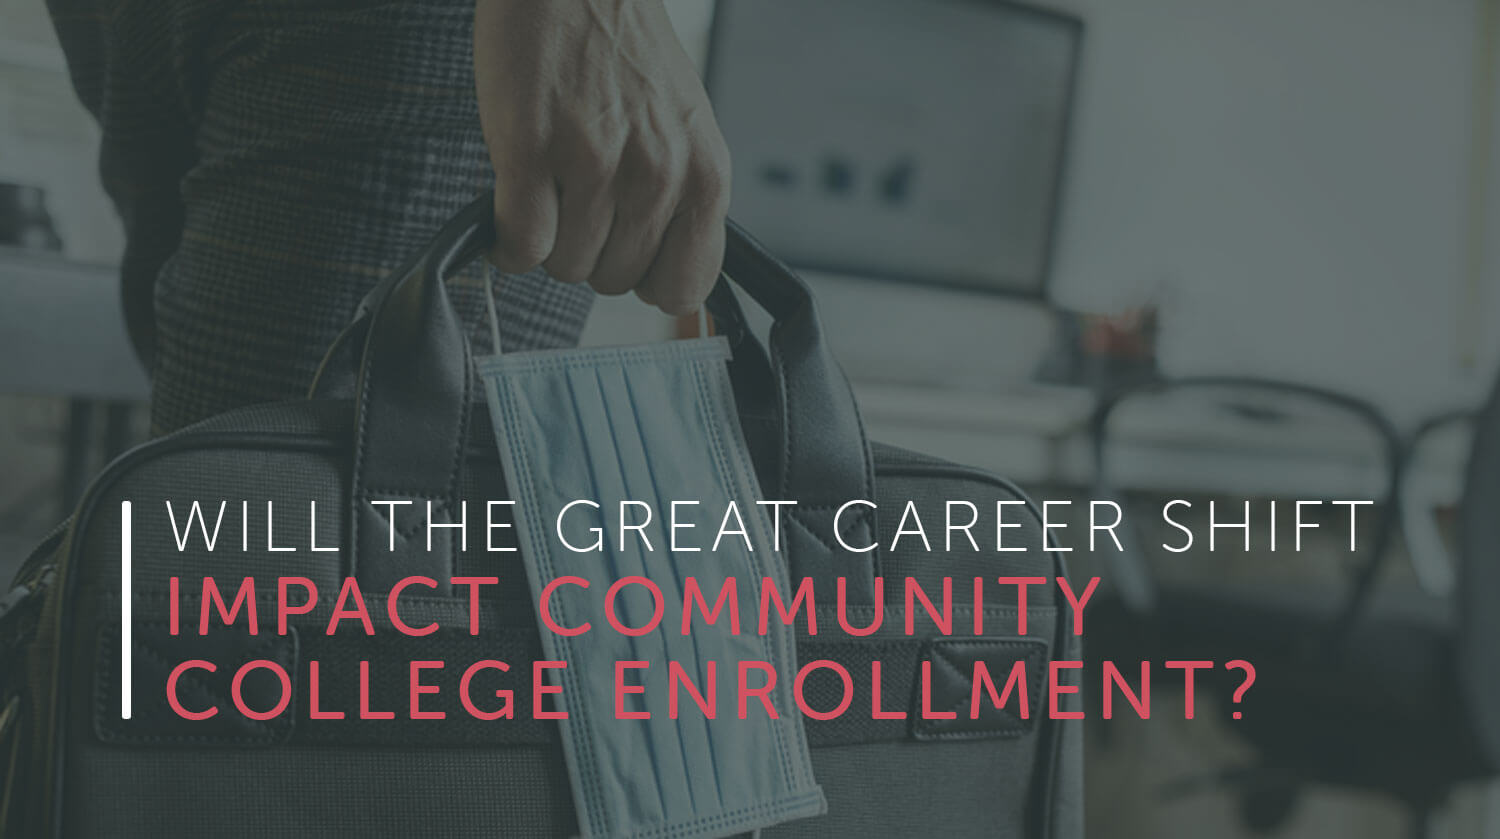 Will the Great Career Shift Impact Community College Enrollment?